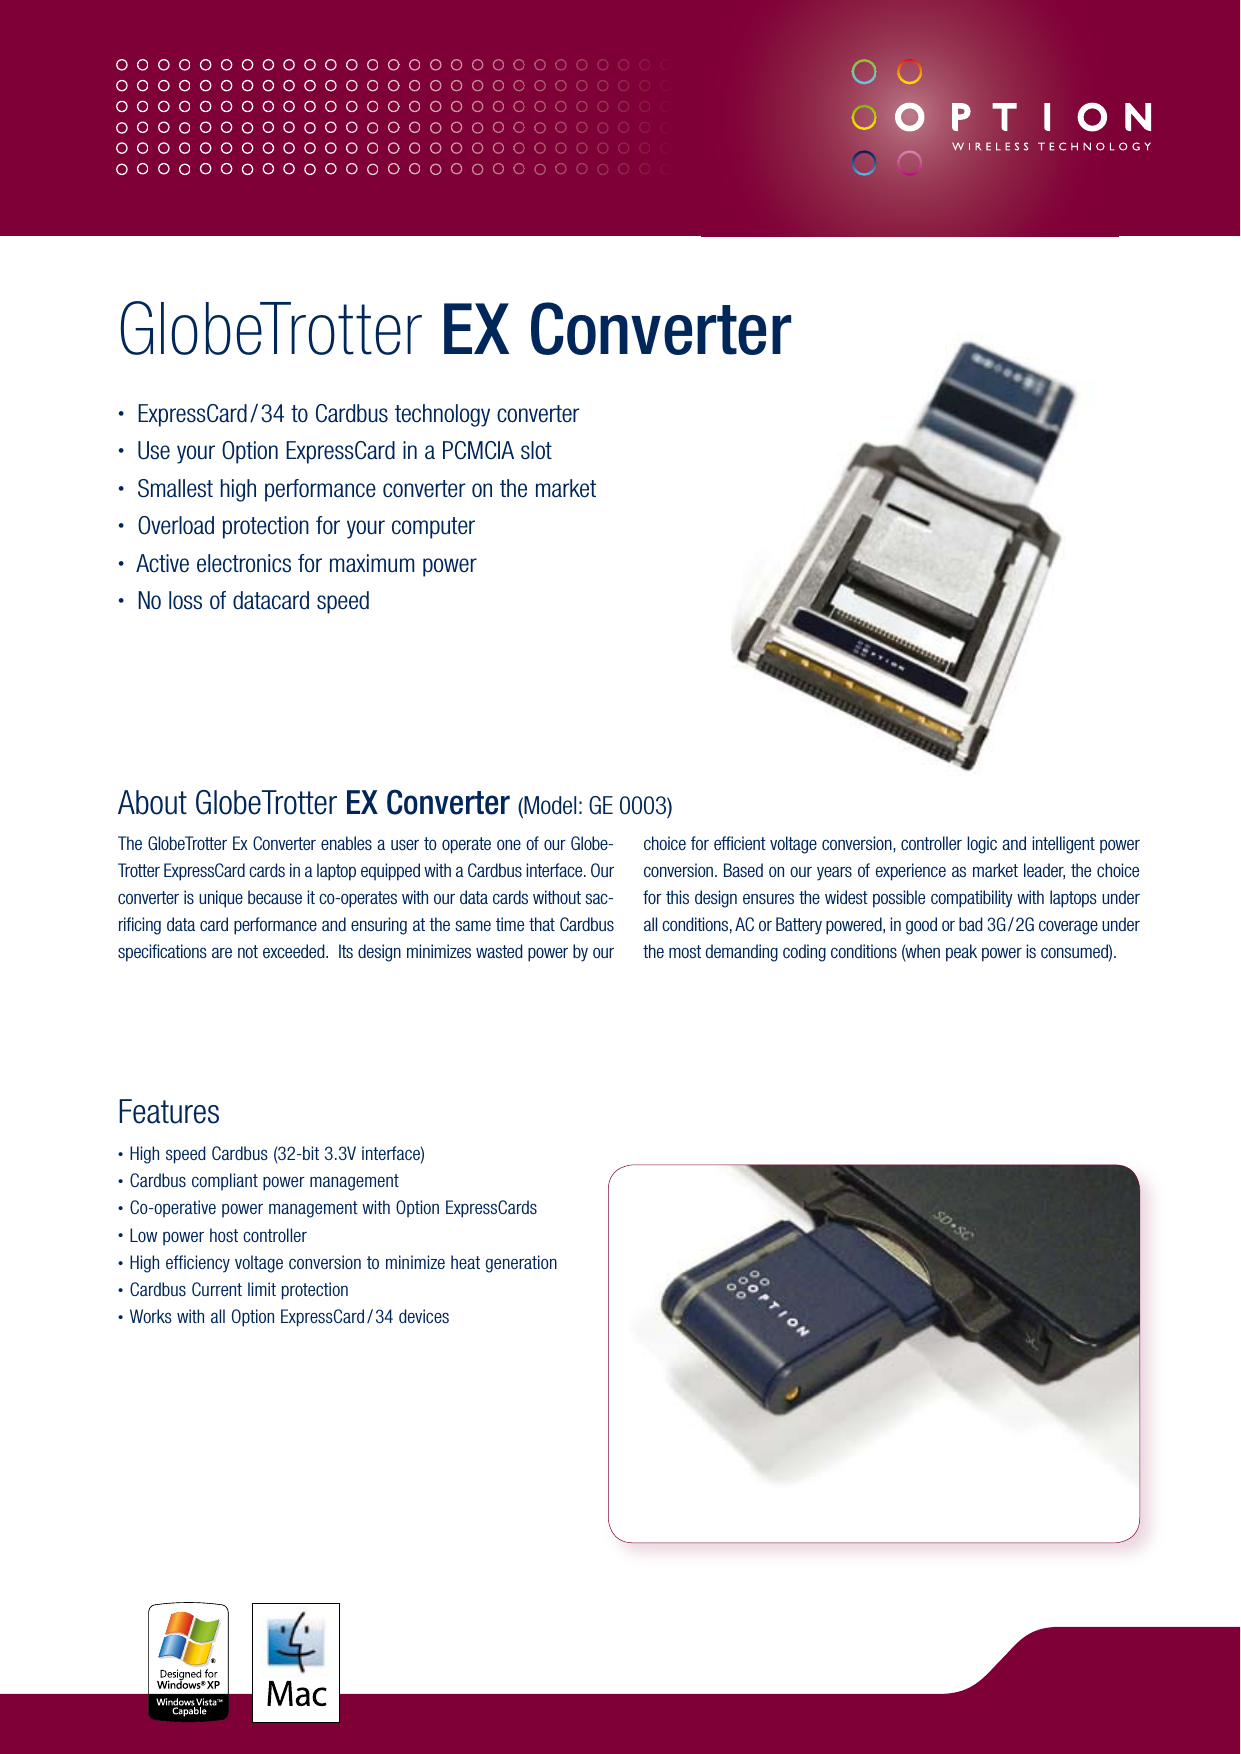 About GlobeTrotter EX Converter (Model: GE 0003)The GlobeTrotter Ex Converter enables a user to operate one of our Globe-Trotter ExpressCard cards in a laptop equipped with a Cardbus interface. Our converter is unique because it co-operates with our data cards without sac-rificing data card performance and ensuring at the same time that Cardbus specifications are not exceeded.  Its design minimizes wasted power by our choice for efficient voltage conversion, controller logic and intelligent power conversion. Based on our years of experience as market leader, the choice for this design ensures the widest possible compatibility with laptops under all conditions, AC or Battery powered, in good or bad 3G / 2G coverage under the most demanding coding conditions (when peak power is consumed).Features• High speed Cardbus (32-bit 3.3V interface)• Cardbus compliant power management• Co-operative power management with Option ExpressCards• Low power host controller• High efficiency voltage conversion to minimize heat generation• Cardbus Current limit protection• Works with all Option ExpressCard / 34 devicesGlobeTrotter EX Converter•  ExpressCard / 34 to Cardbus technology converter•  Use your Option ExpressCard in a PCMCIA slot•  Smallest high performance converter on the market•  Overload protection for your computer•  Active electronics for maximum power•  No loss of datacard speed